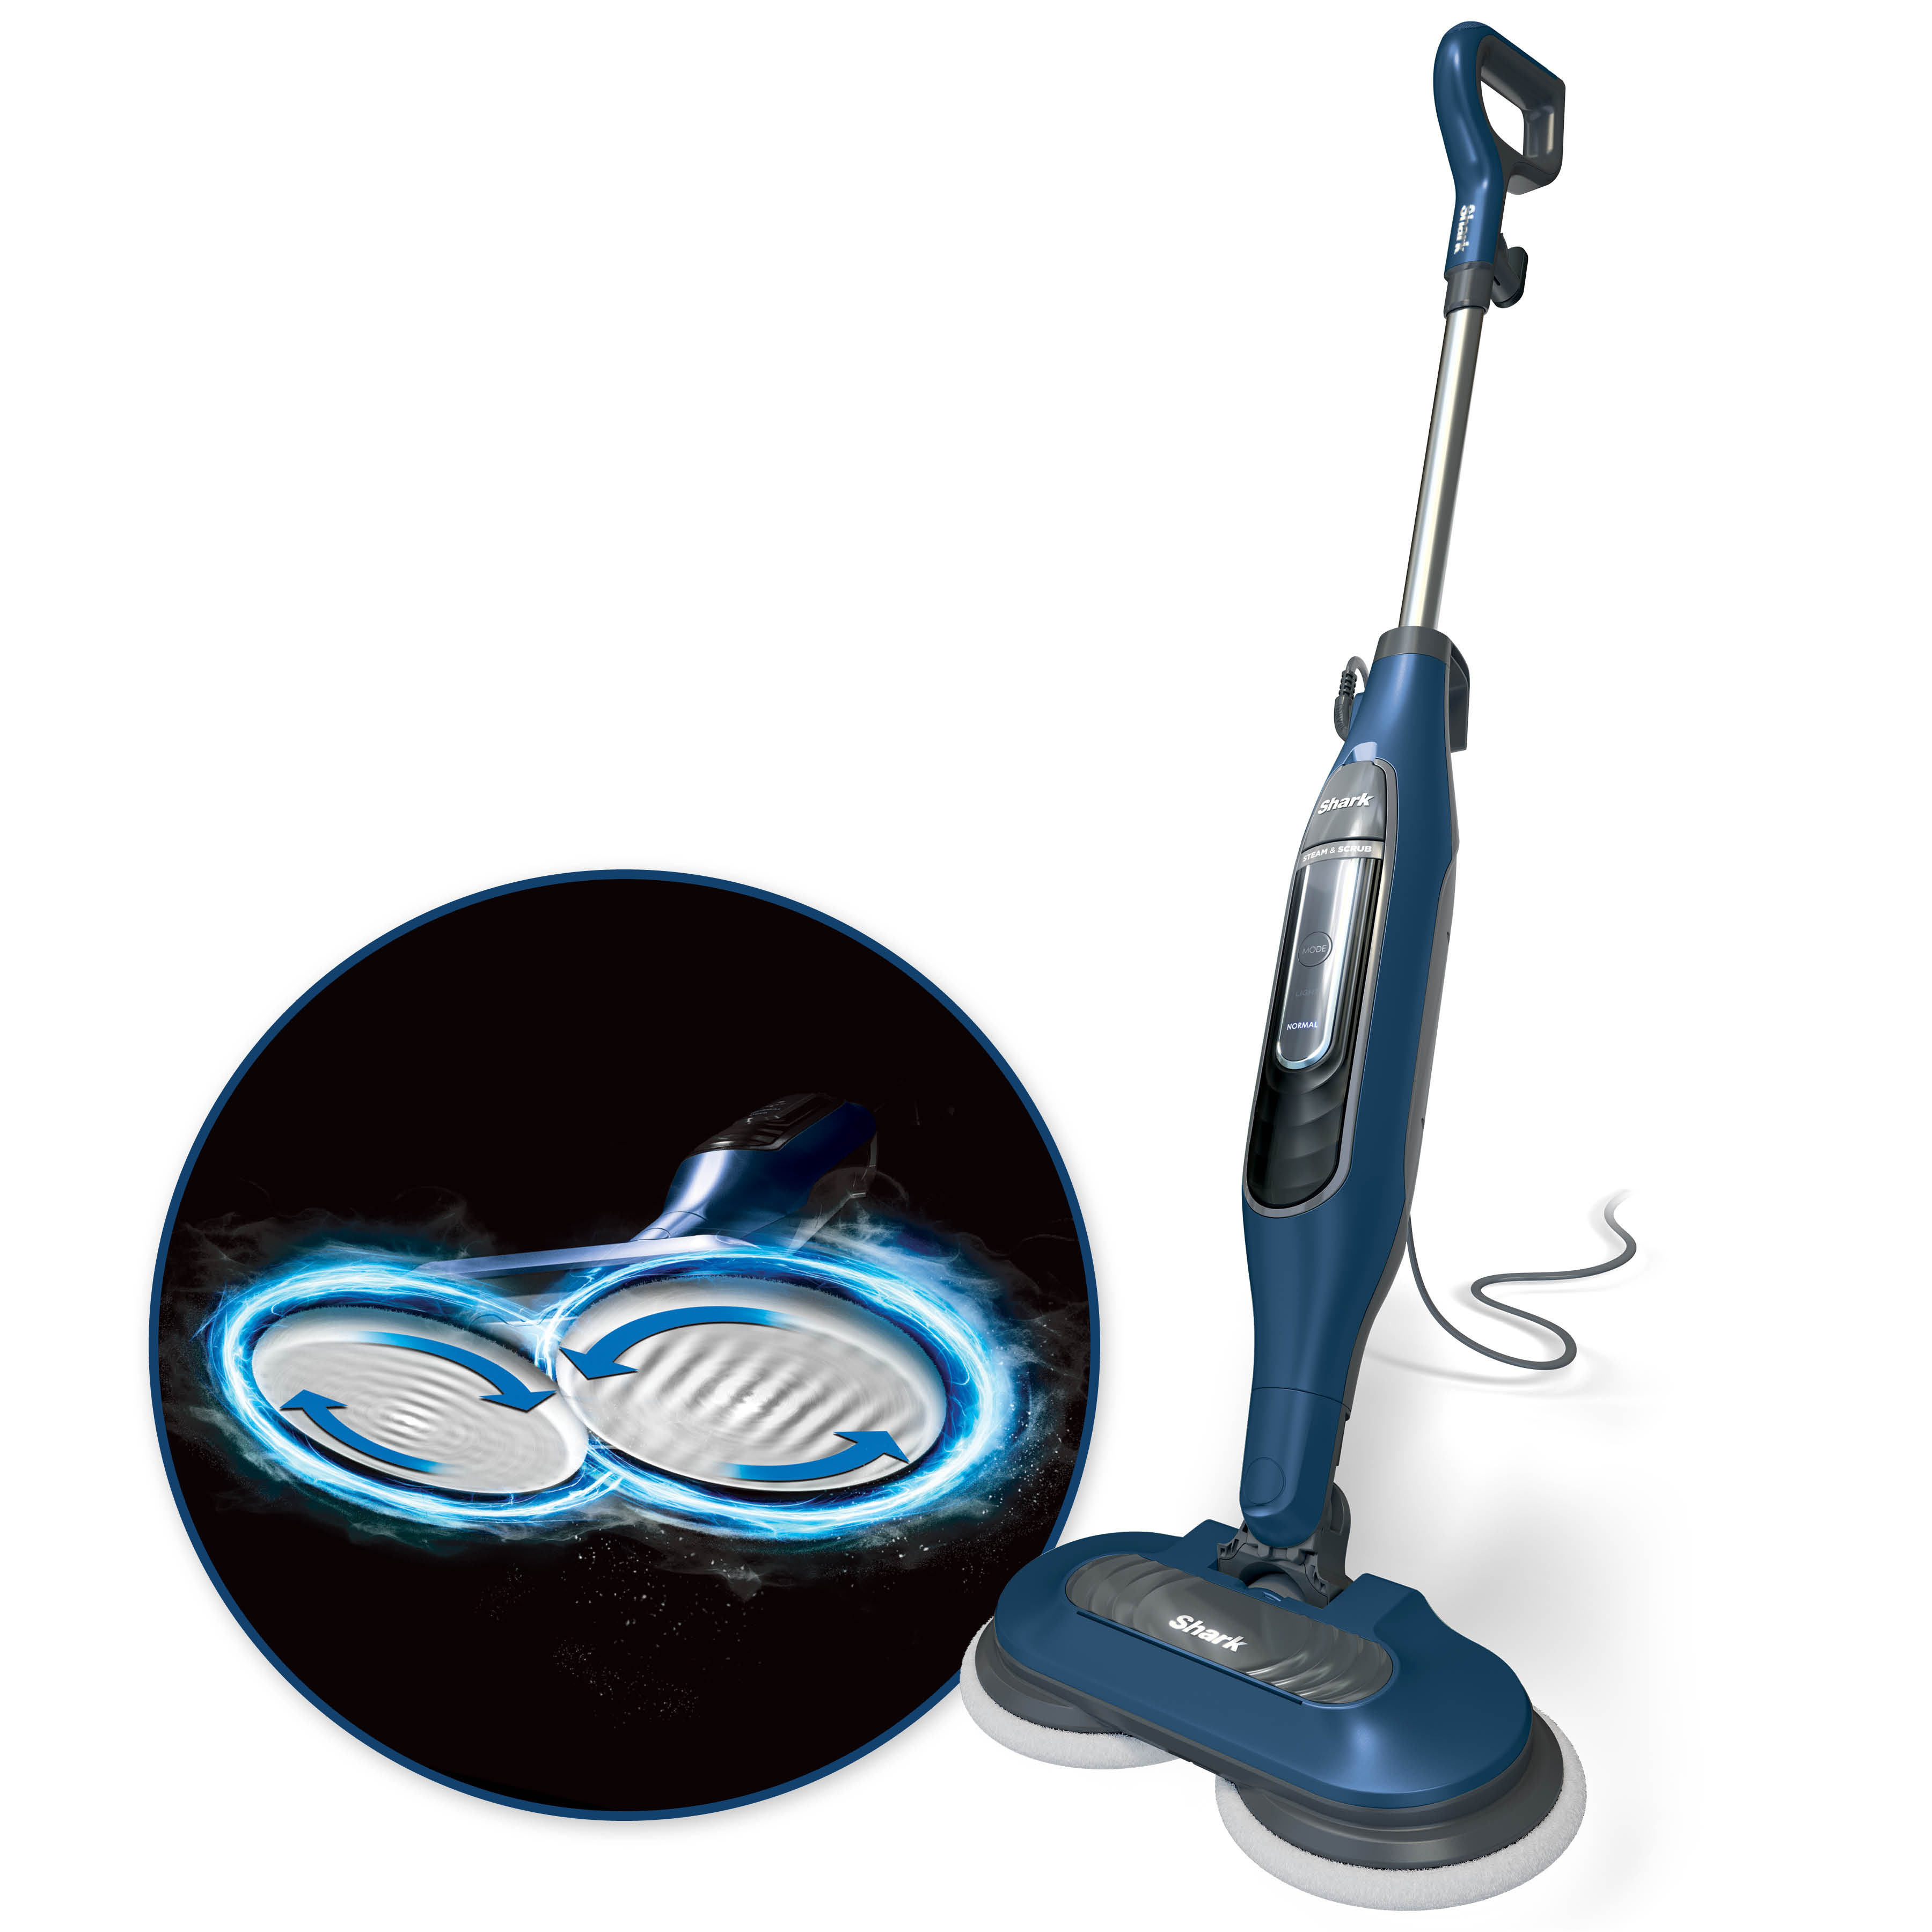 Shark® Steam & Scrub All-in-One Scrubbing and Sanitizing Hard Floor Steam Mop S7020 - image 1 of 13